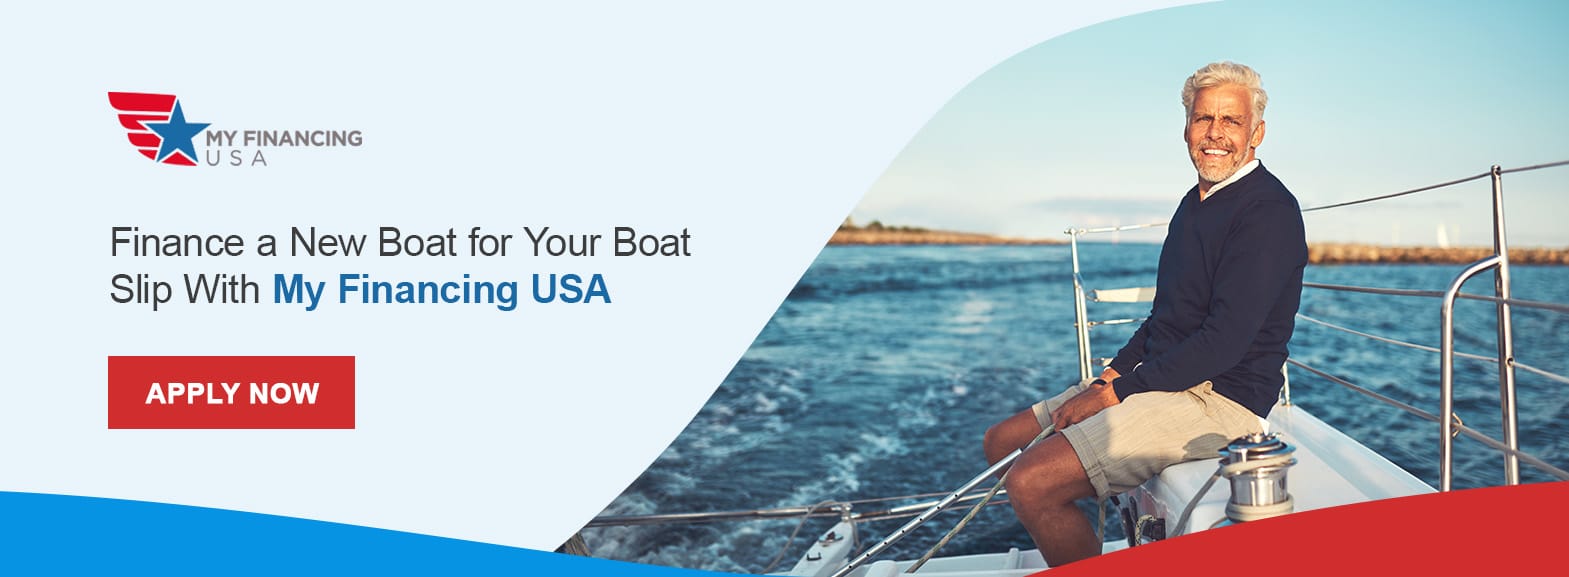 Finance a New Boat for Your Boat Slip With My Financing USA. Apply now!